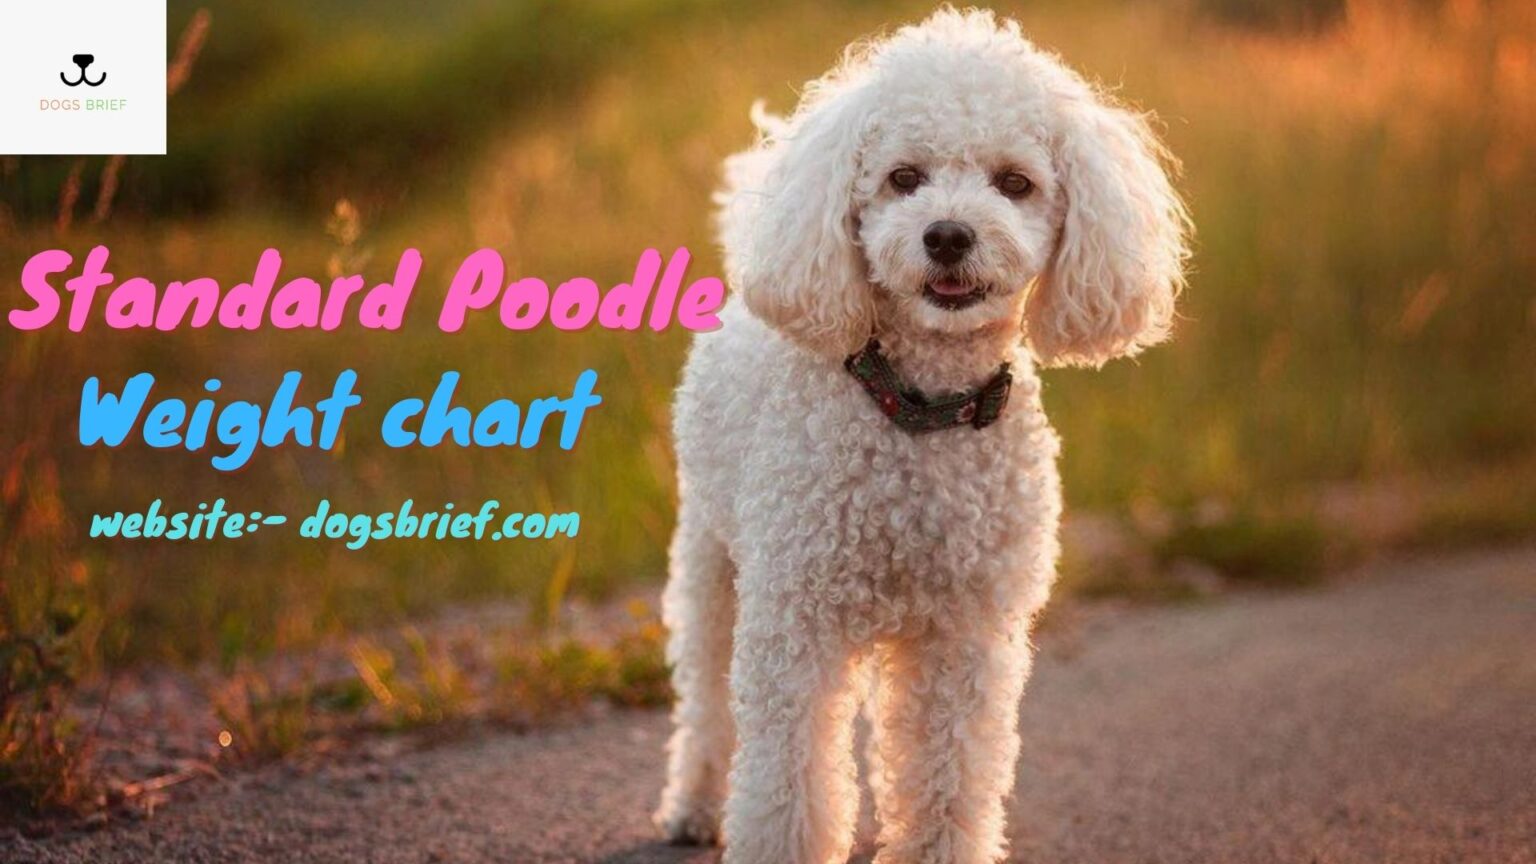 Puppy Growth Chart Poodle